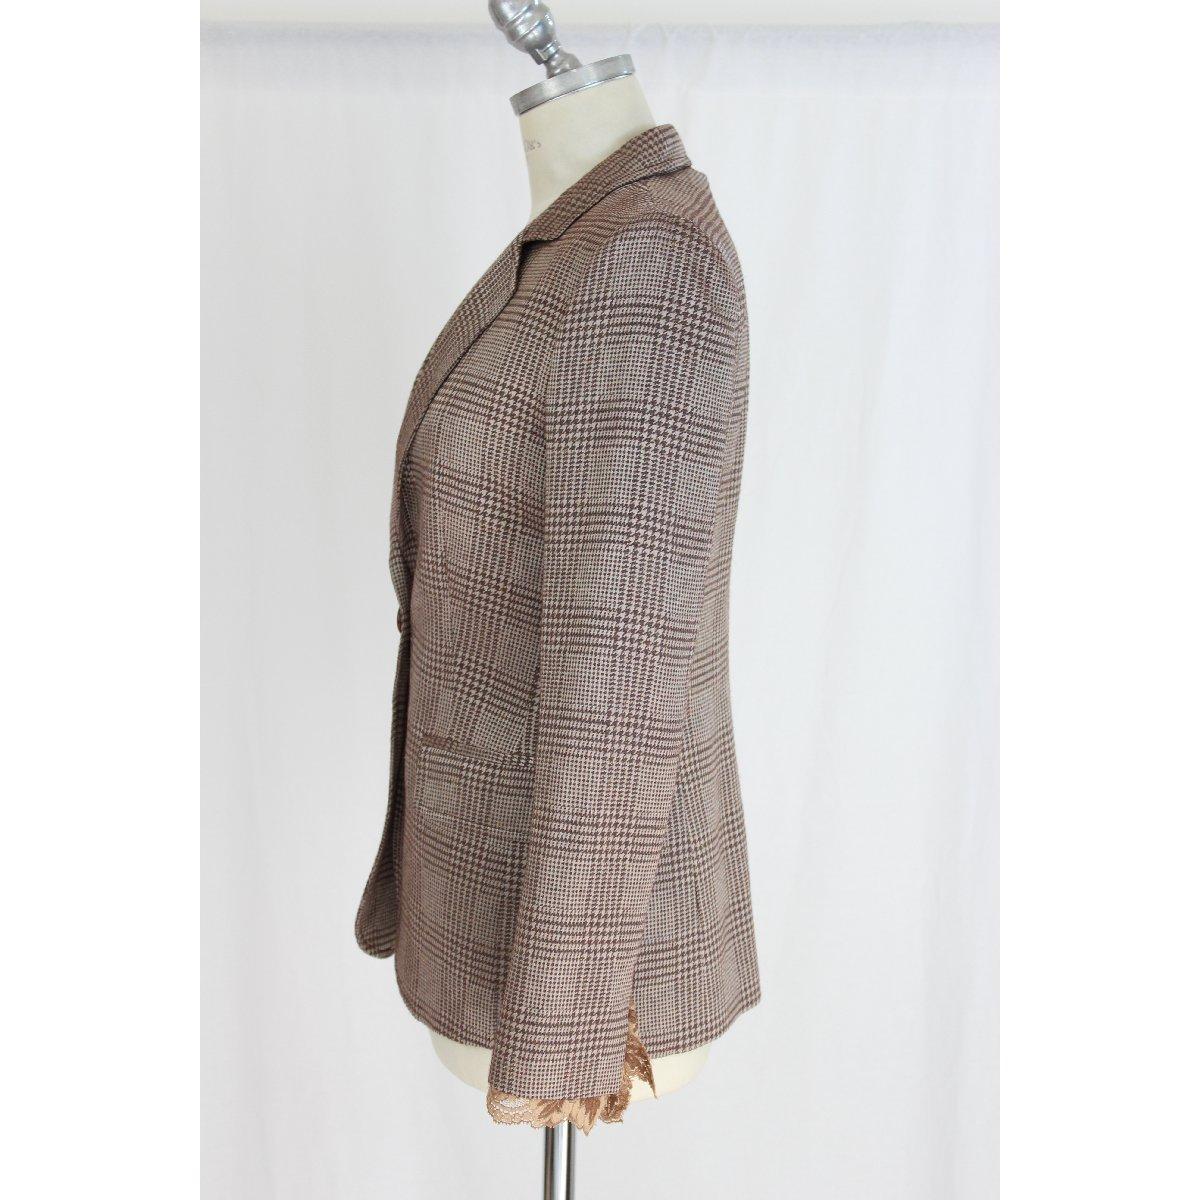 Gianfranco Ferrè vintage jacket. Brown color, silk blend with lace inserted at the ends of the sleeves. Slim fit. Animalier interior lining.
Size: 40 It 6 Us 8 Uk

Shoulder: 40 cm
Bust / Chest: 47 cm
Sleeves: 60 cm
Length: 70 cm
Brown